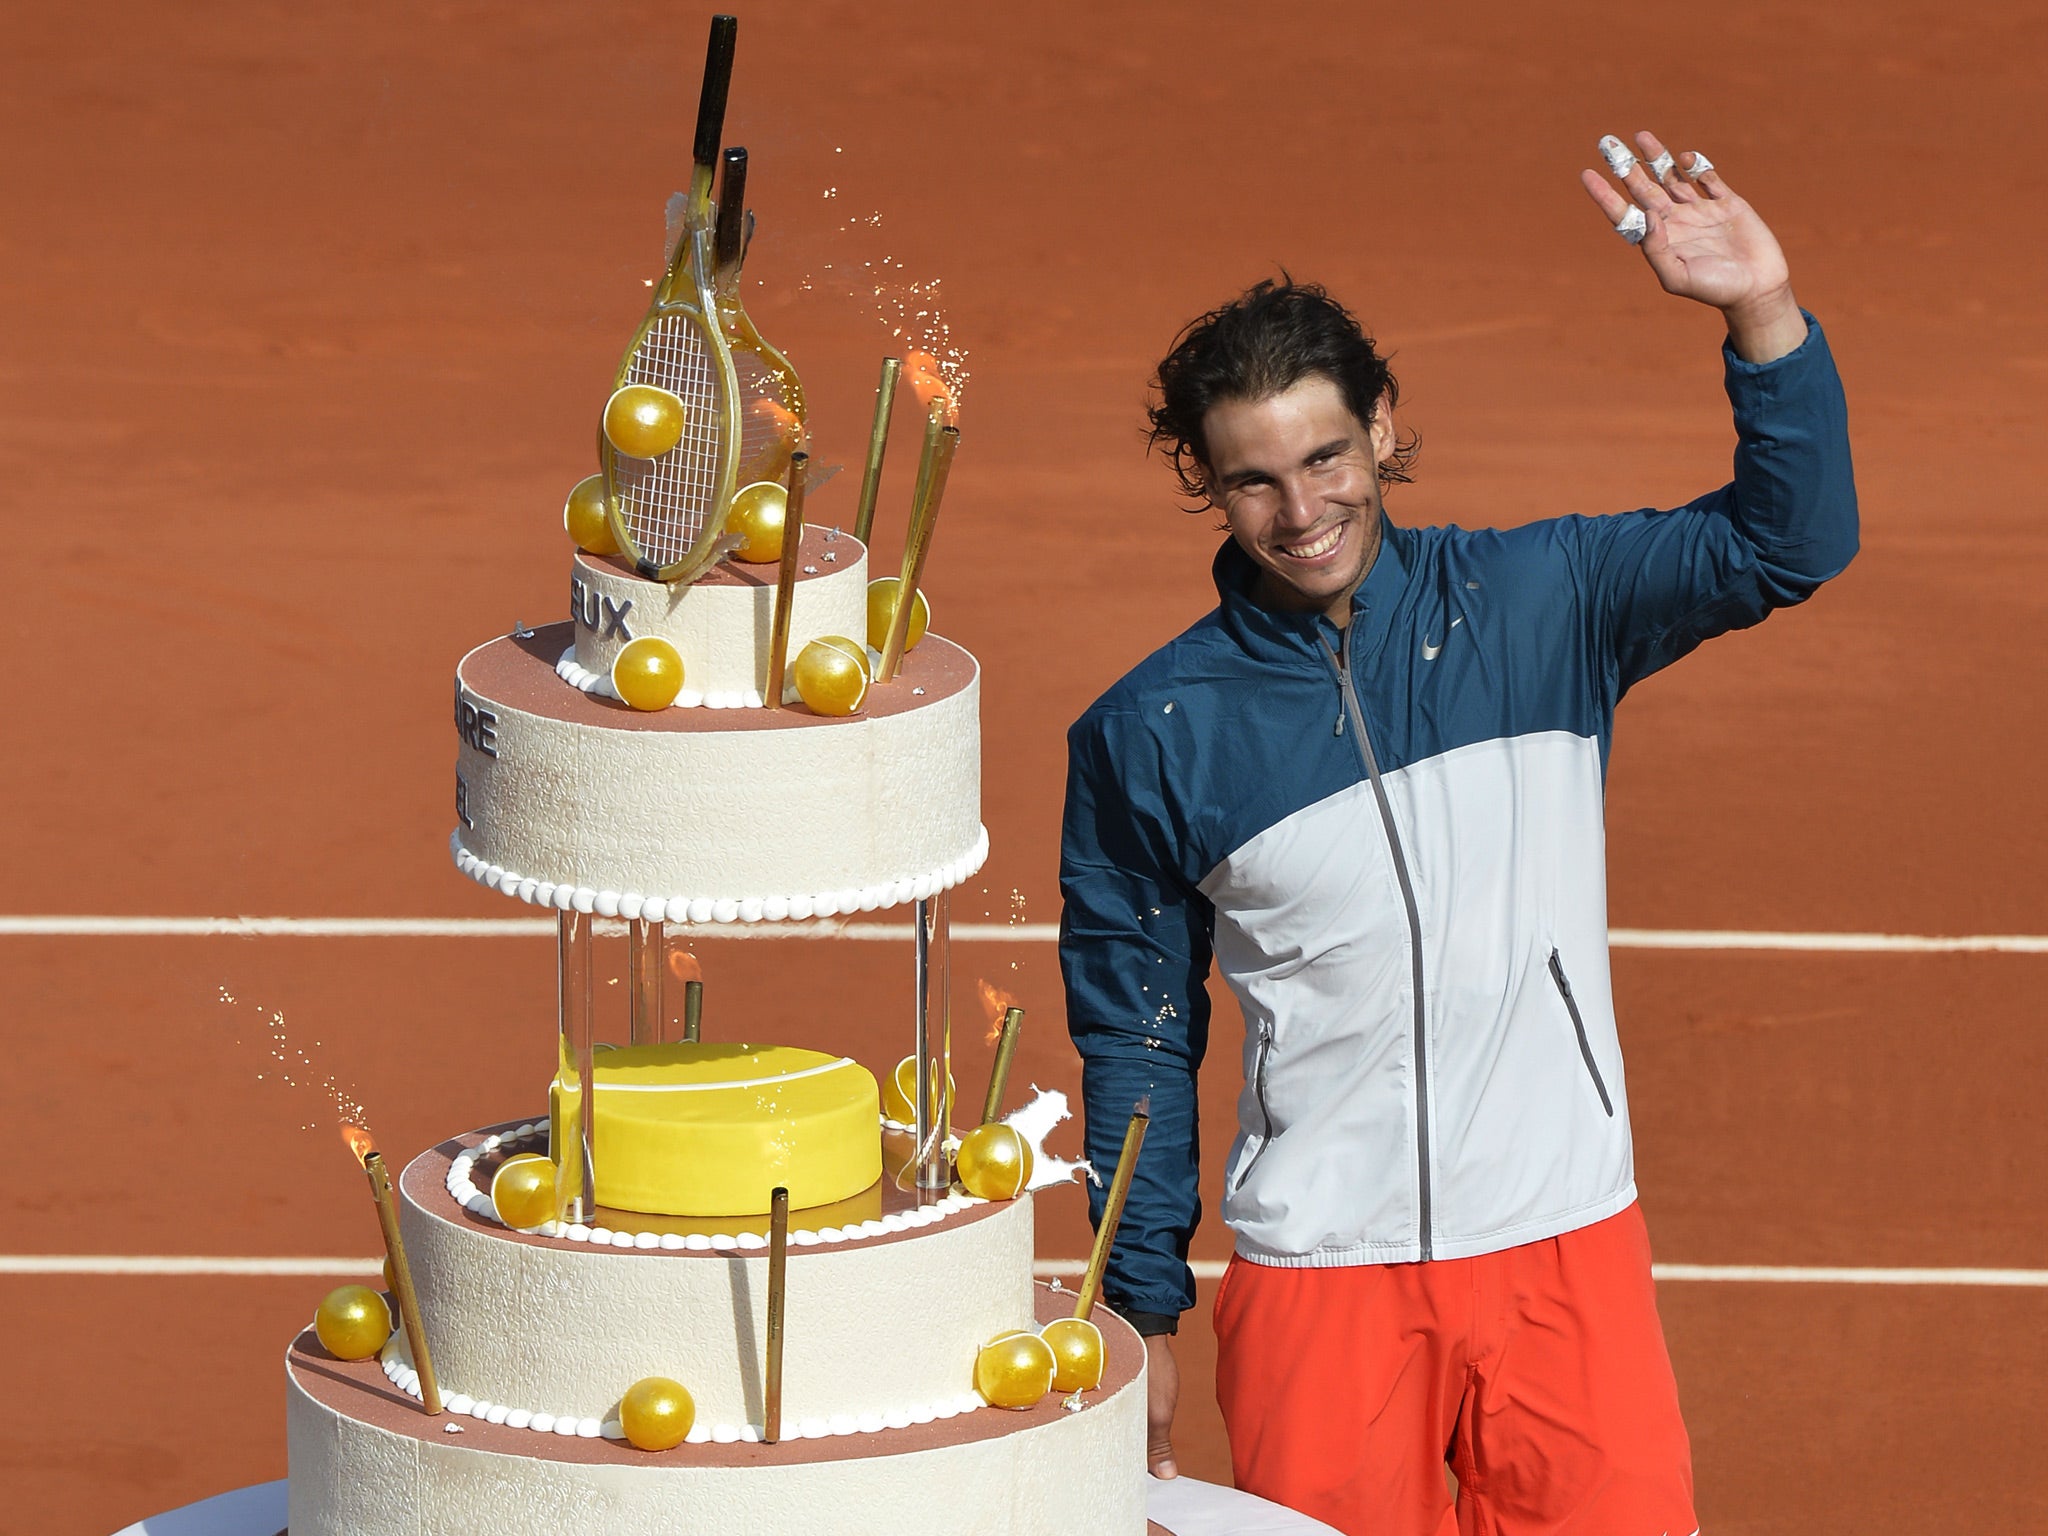 Spain's Rafael Nadal poses with his birthday cake after winning his French tennis Open round of 16 match at the Roland Garros